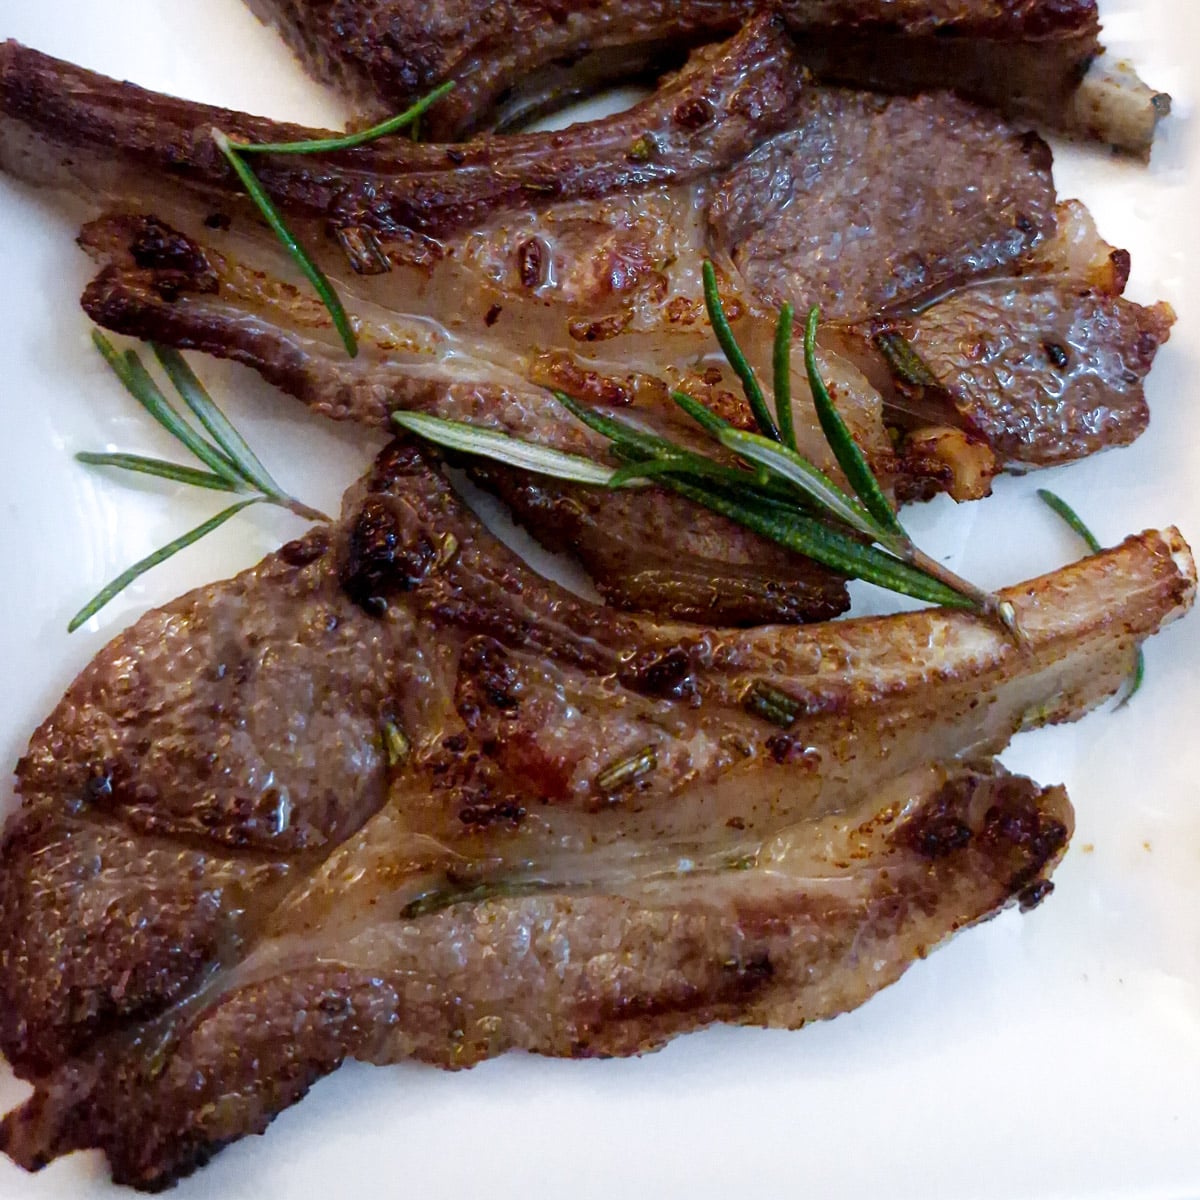 Close up of 2 lamb chops on a plate, garnished with rosemary.